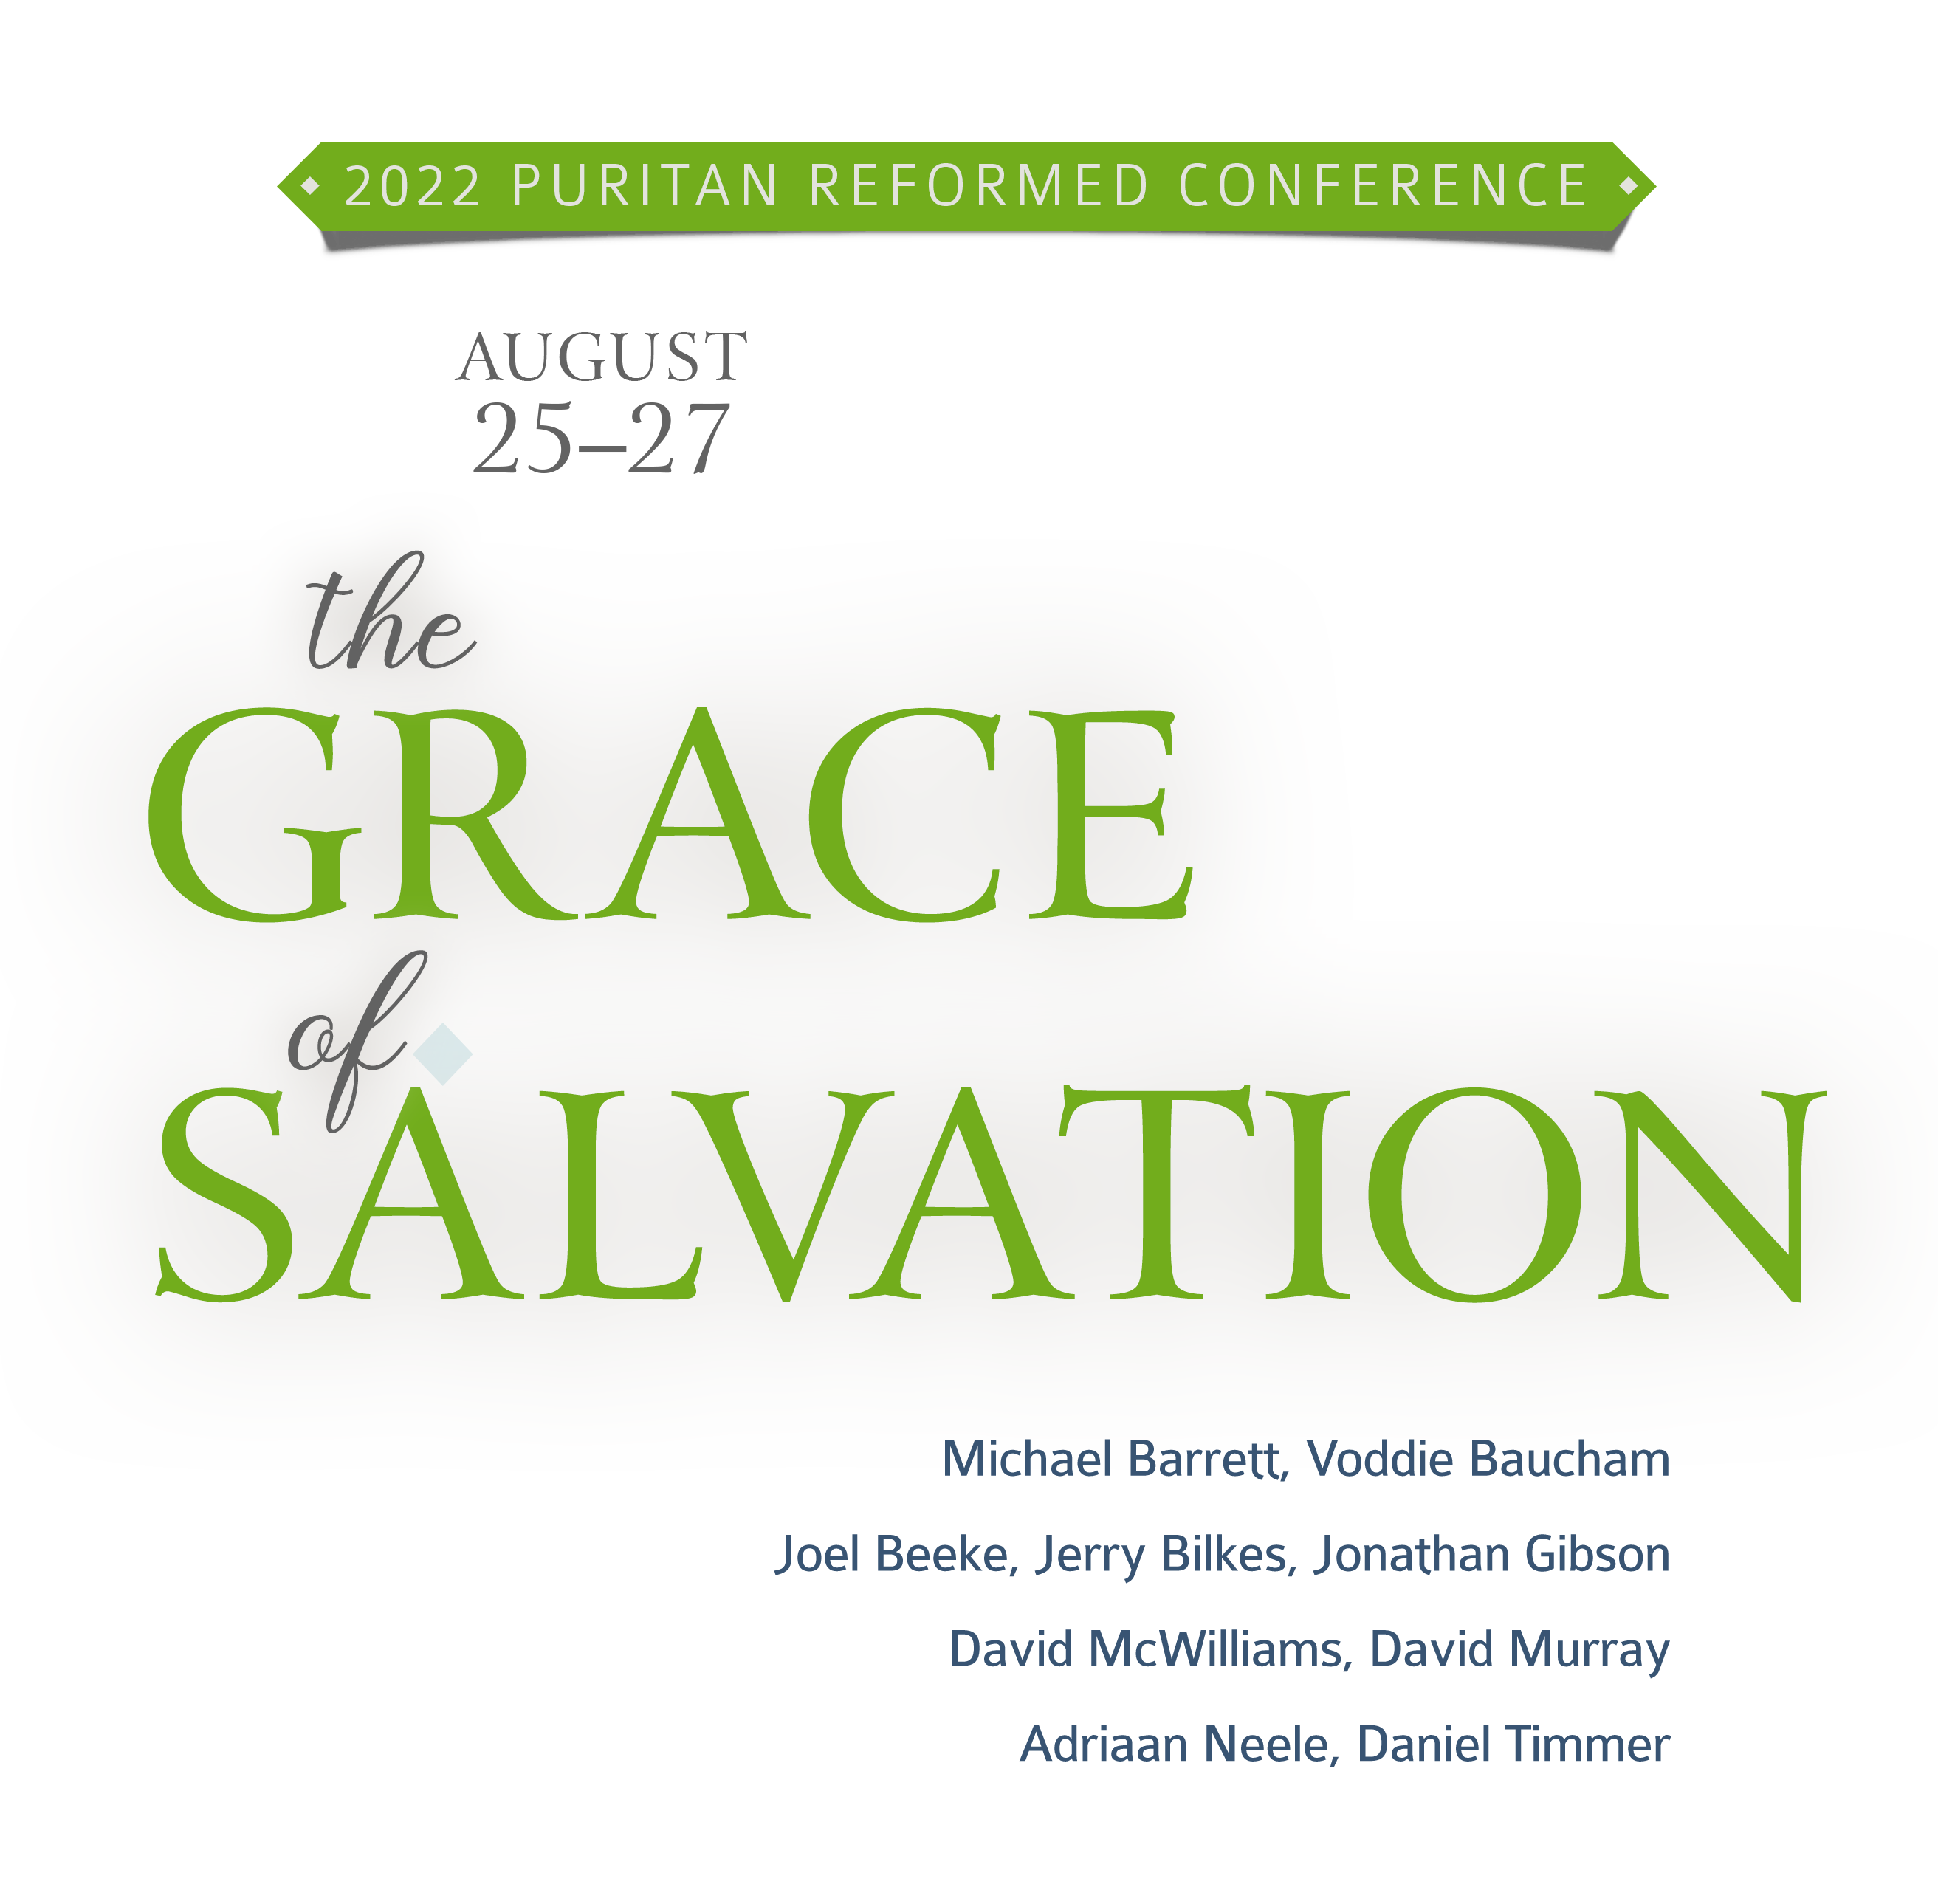 2022 Puritan Reformed Conference The Grace of Salvation